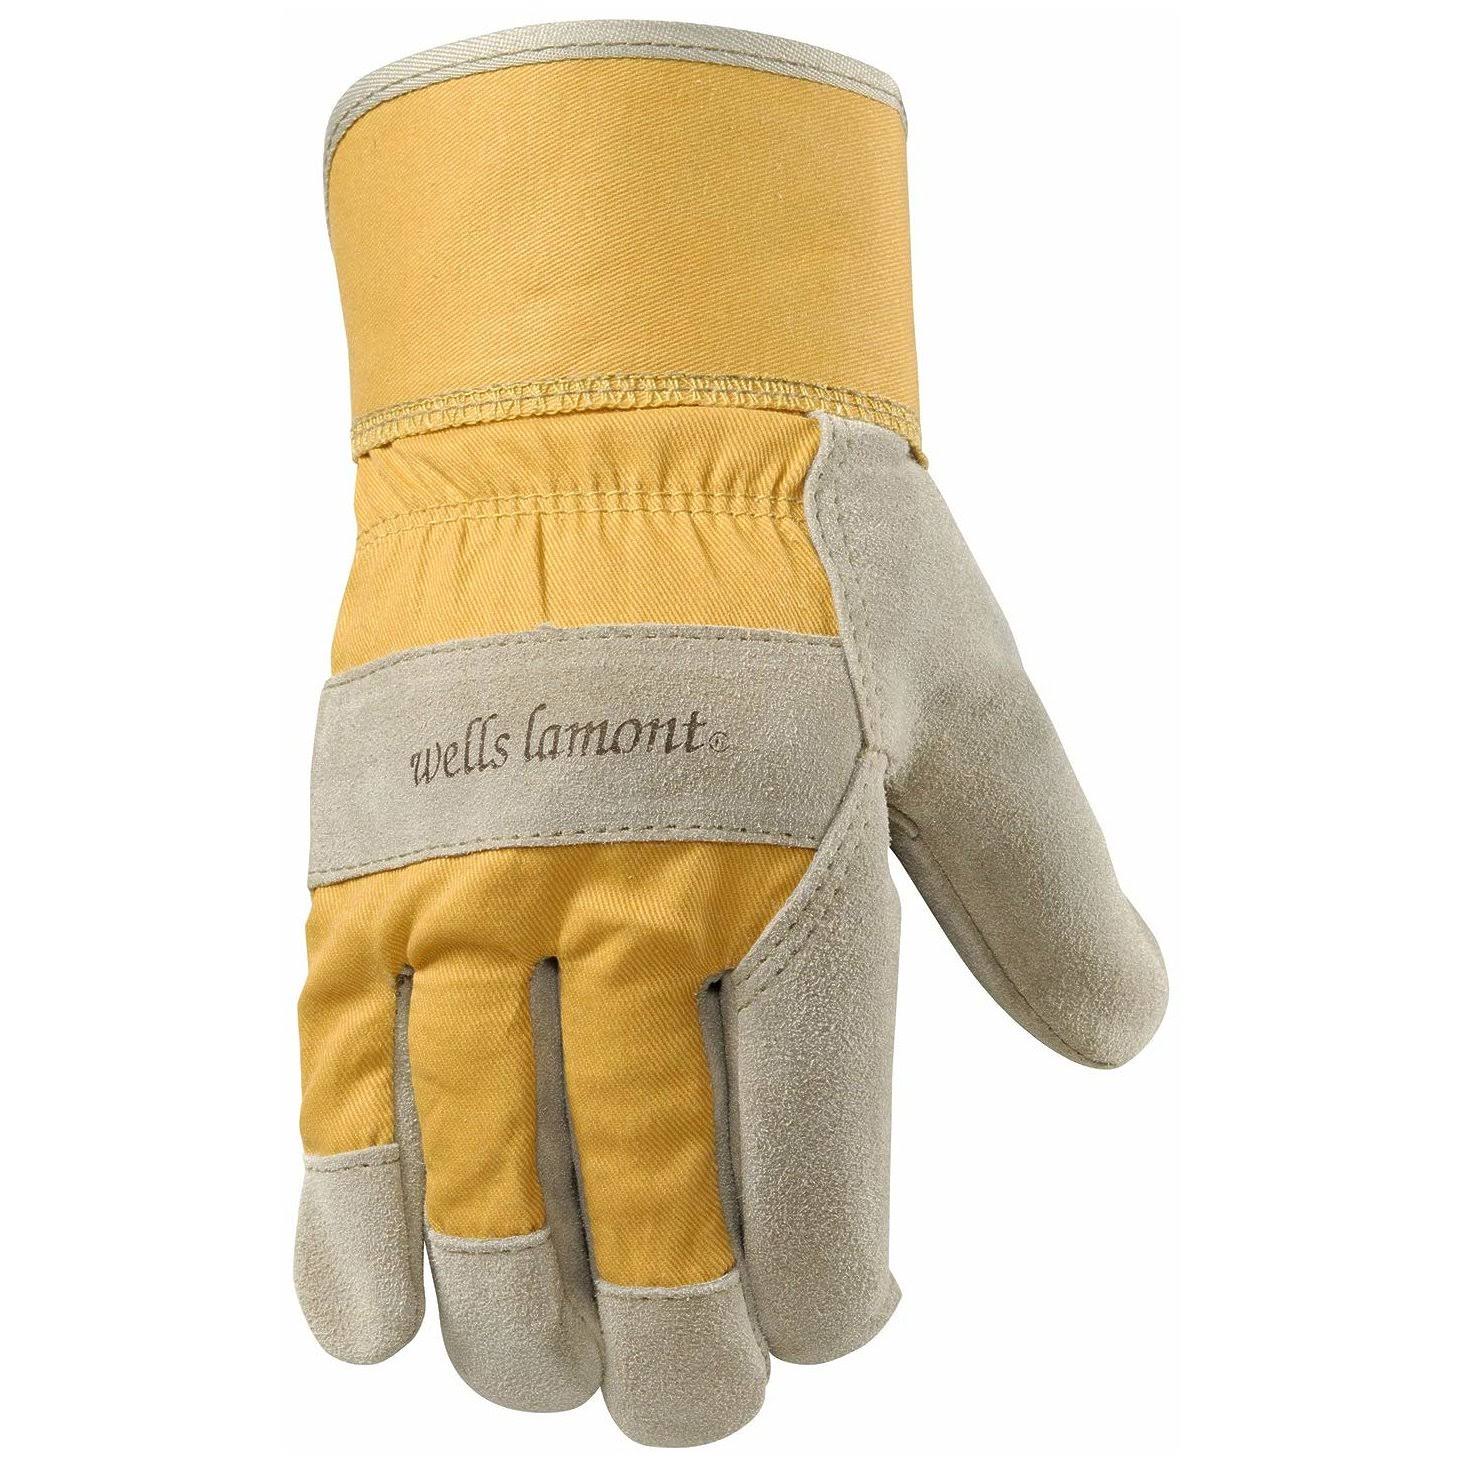 Wells Lamont Leather Work Gloves - with Safety Cuff, Suede Cowhide, Small